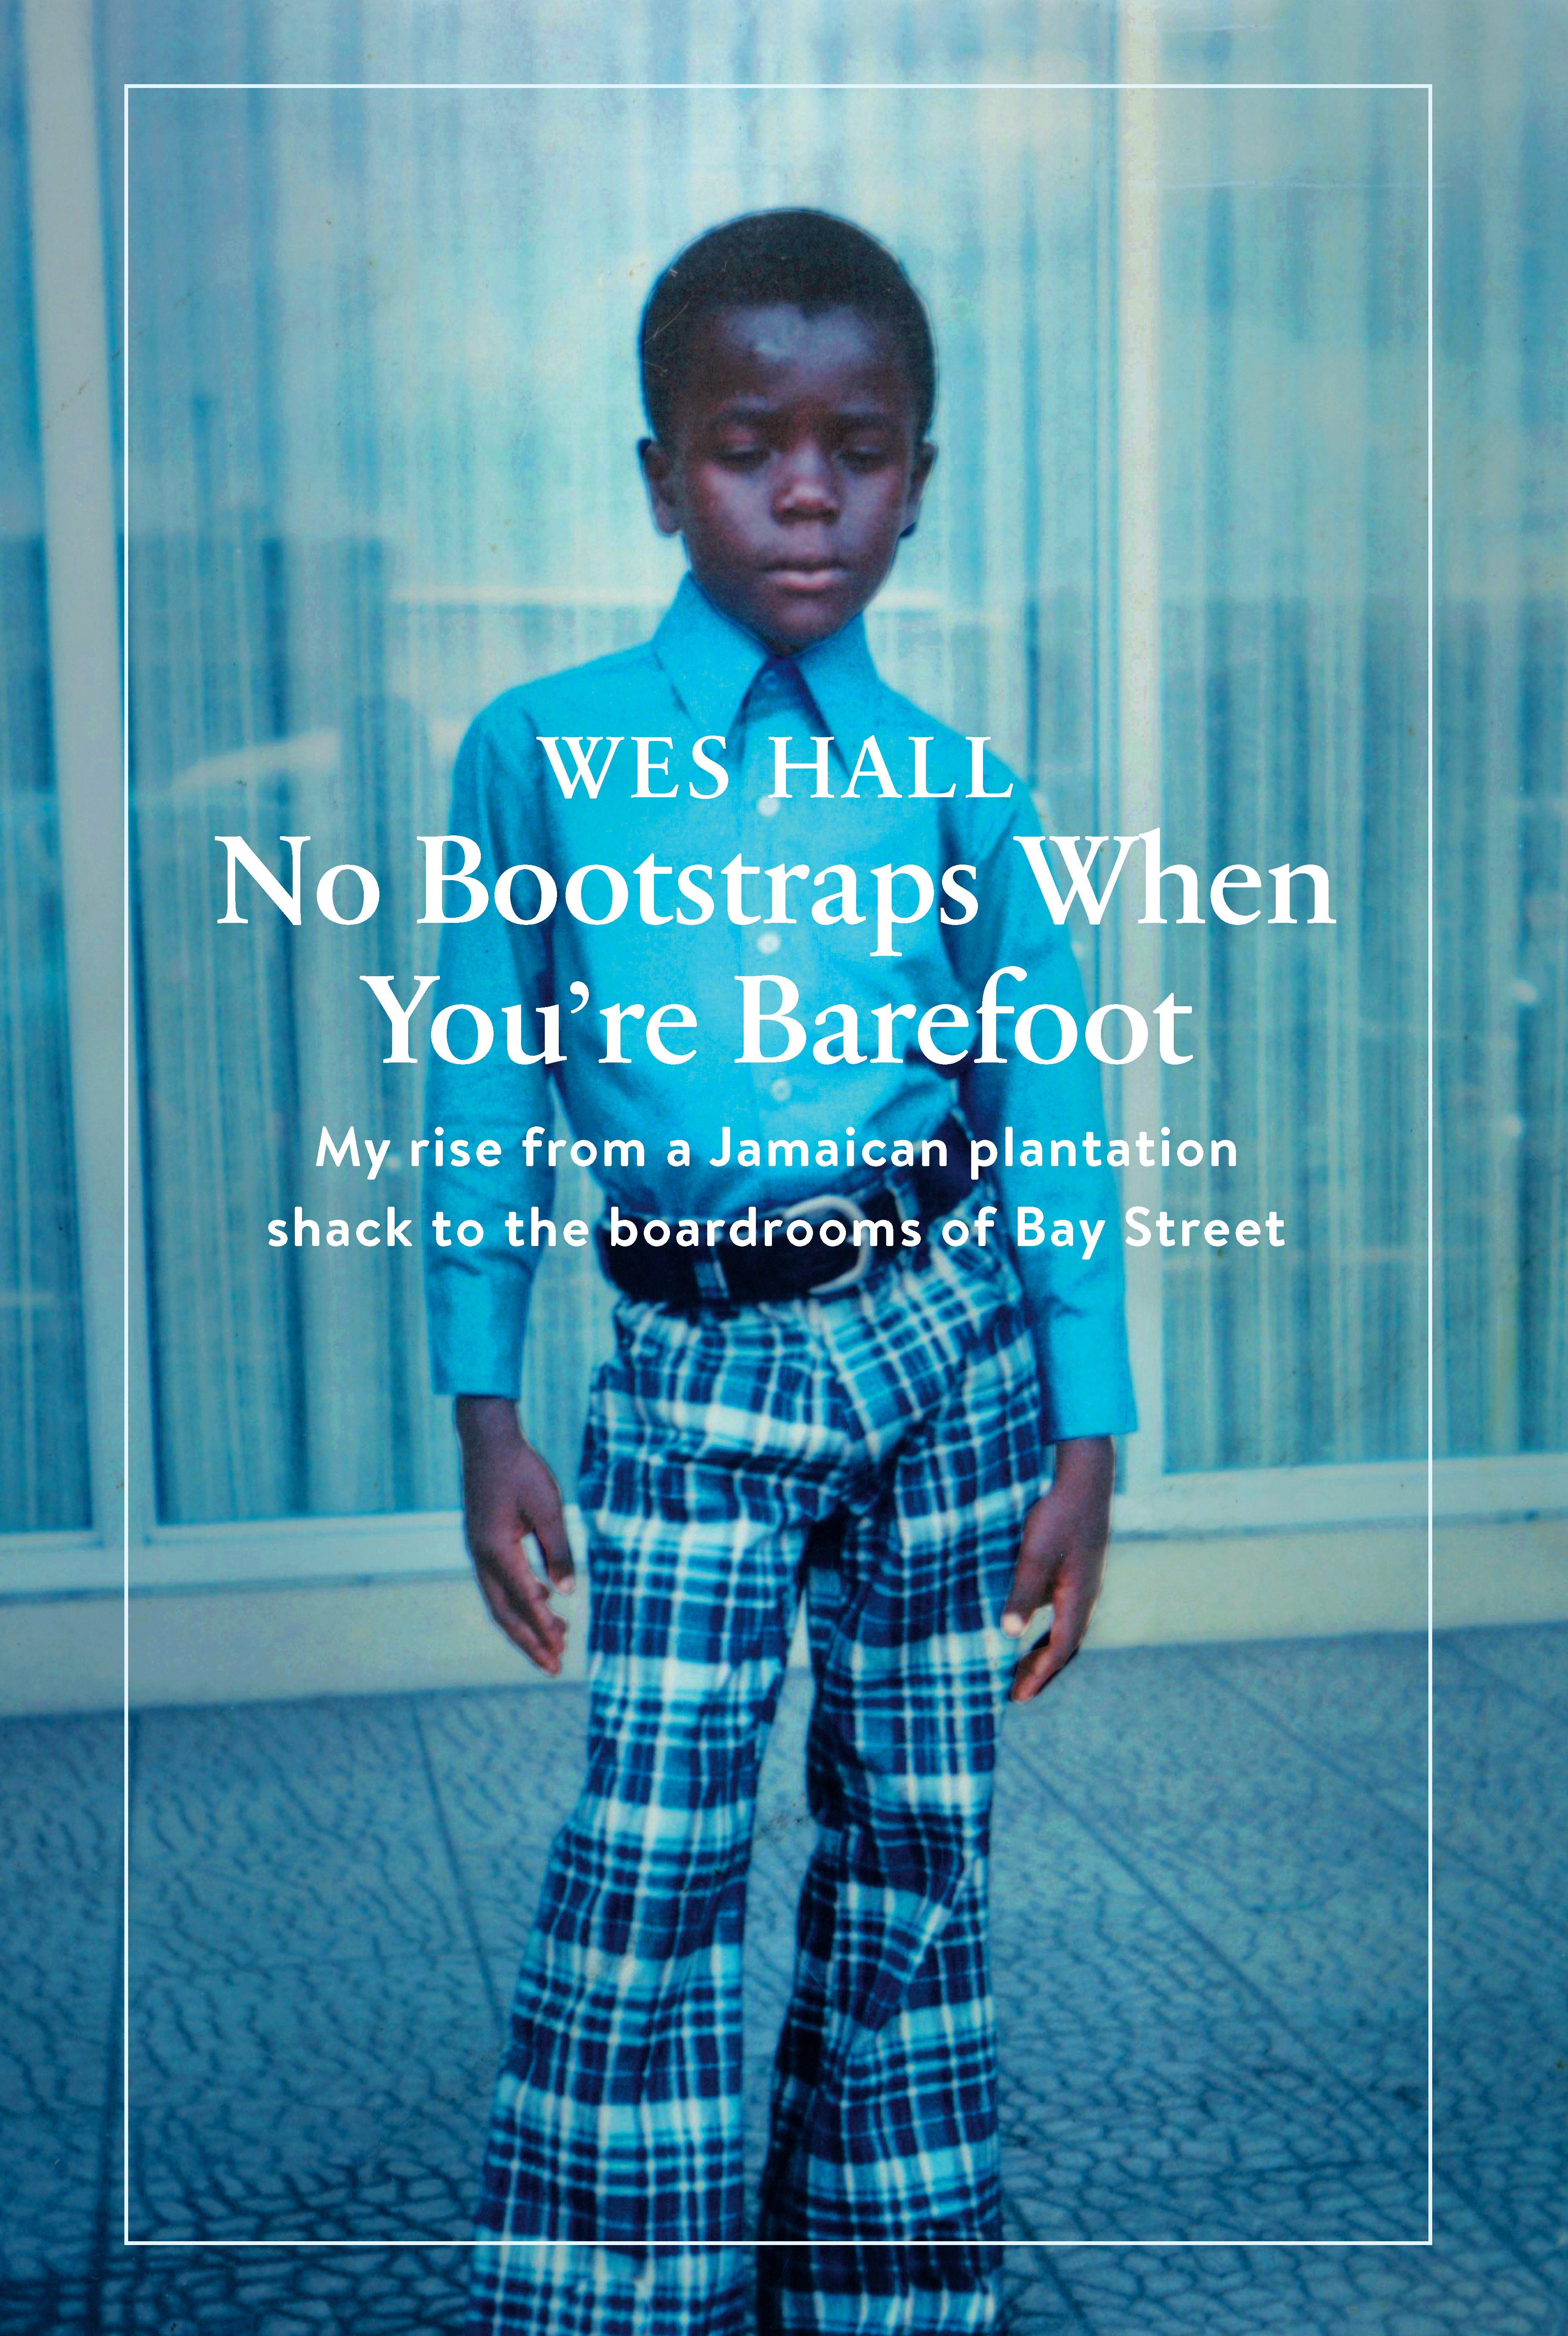 No Bootstraps When You're Barefoot : My rise from a Jamaican plantation shack to the boardrooms of Bay Street | Biography & Memoir